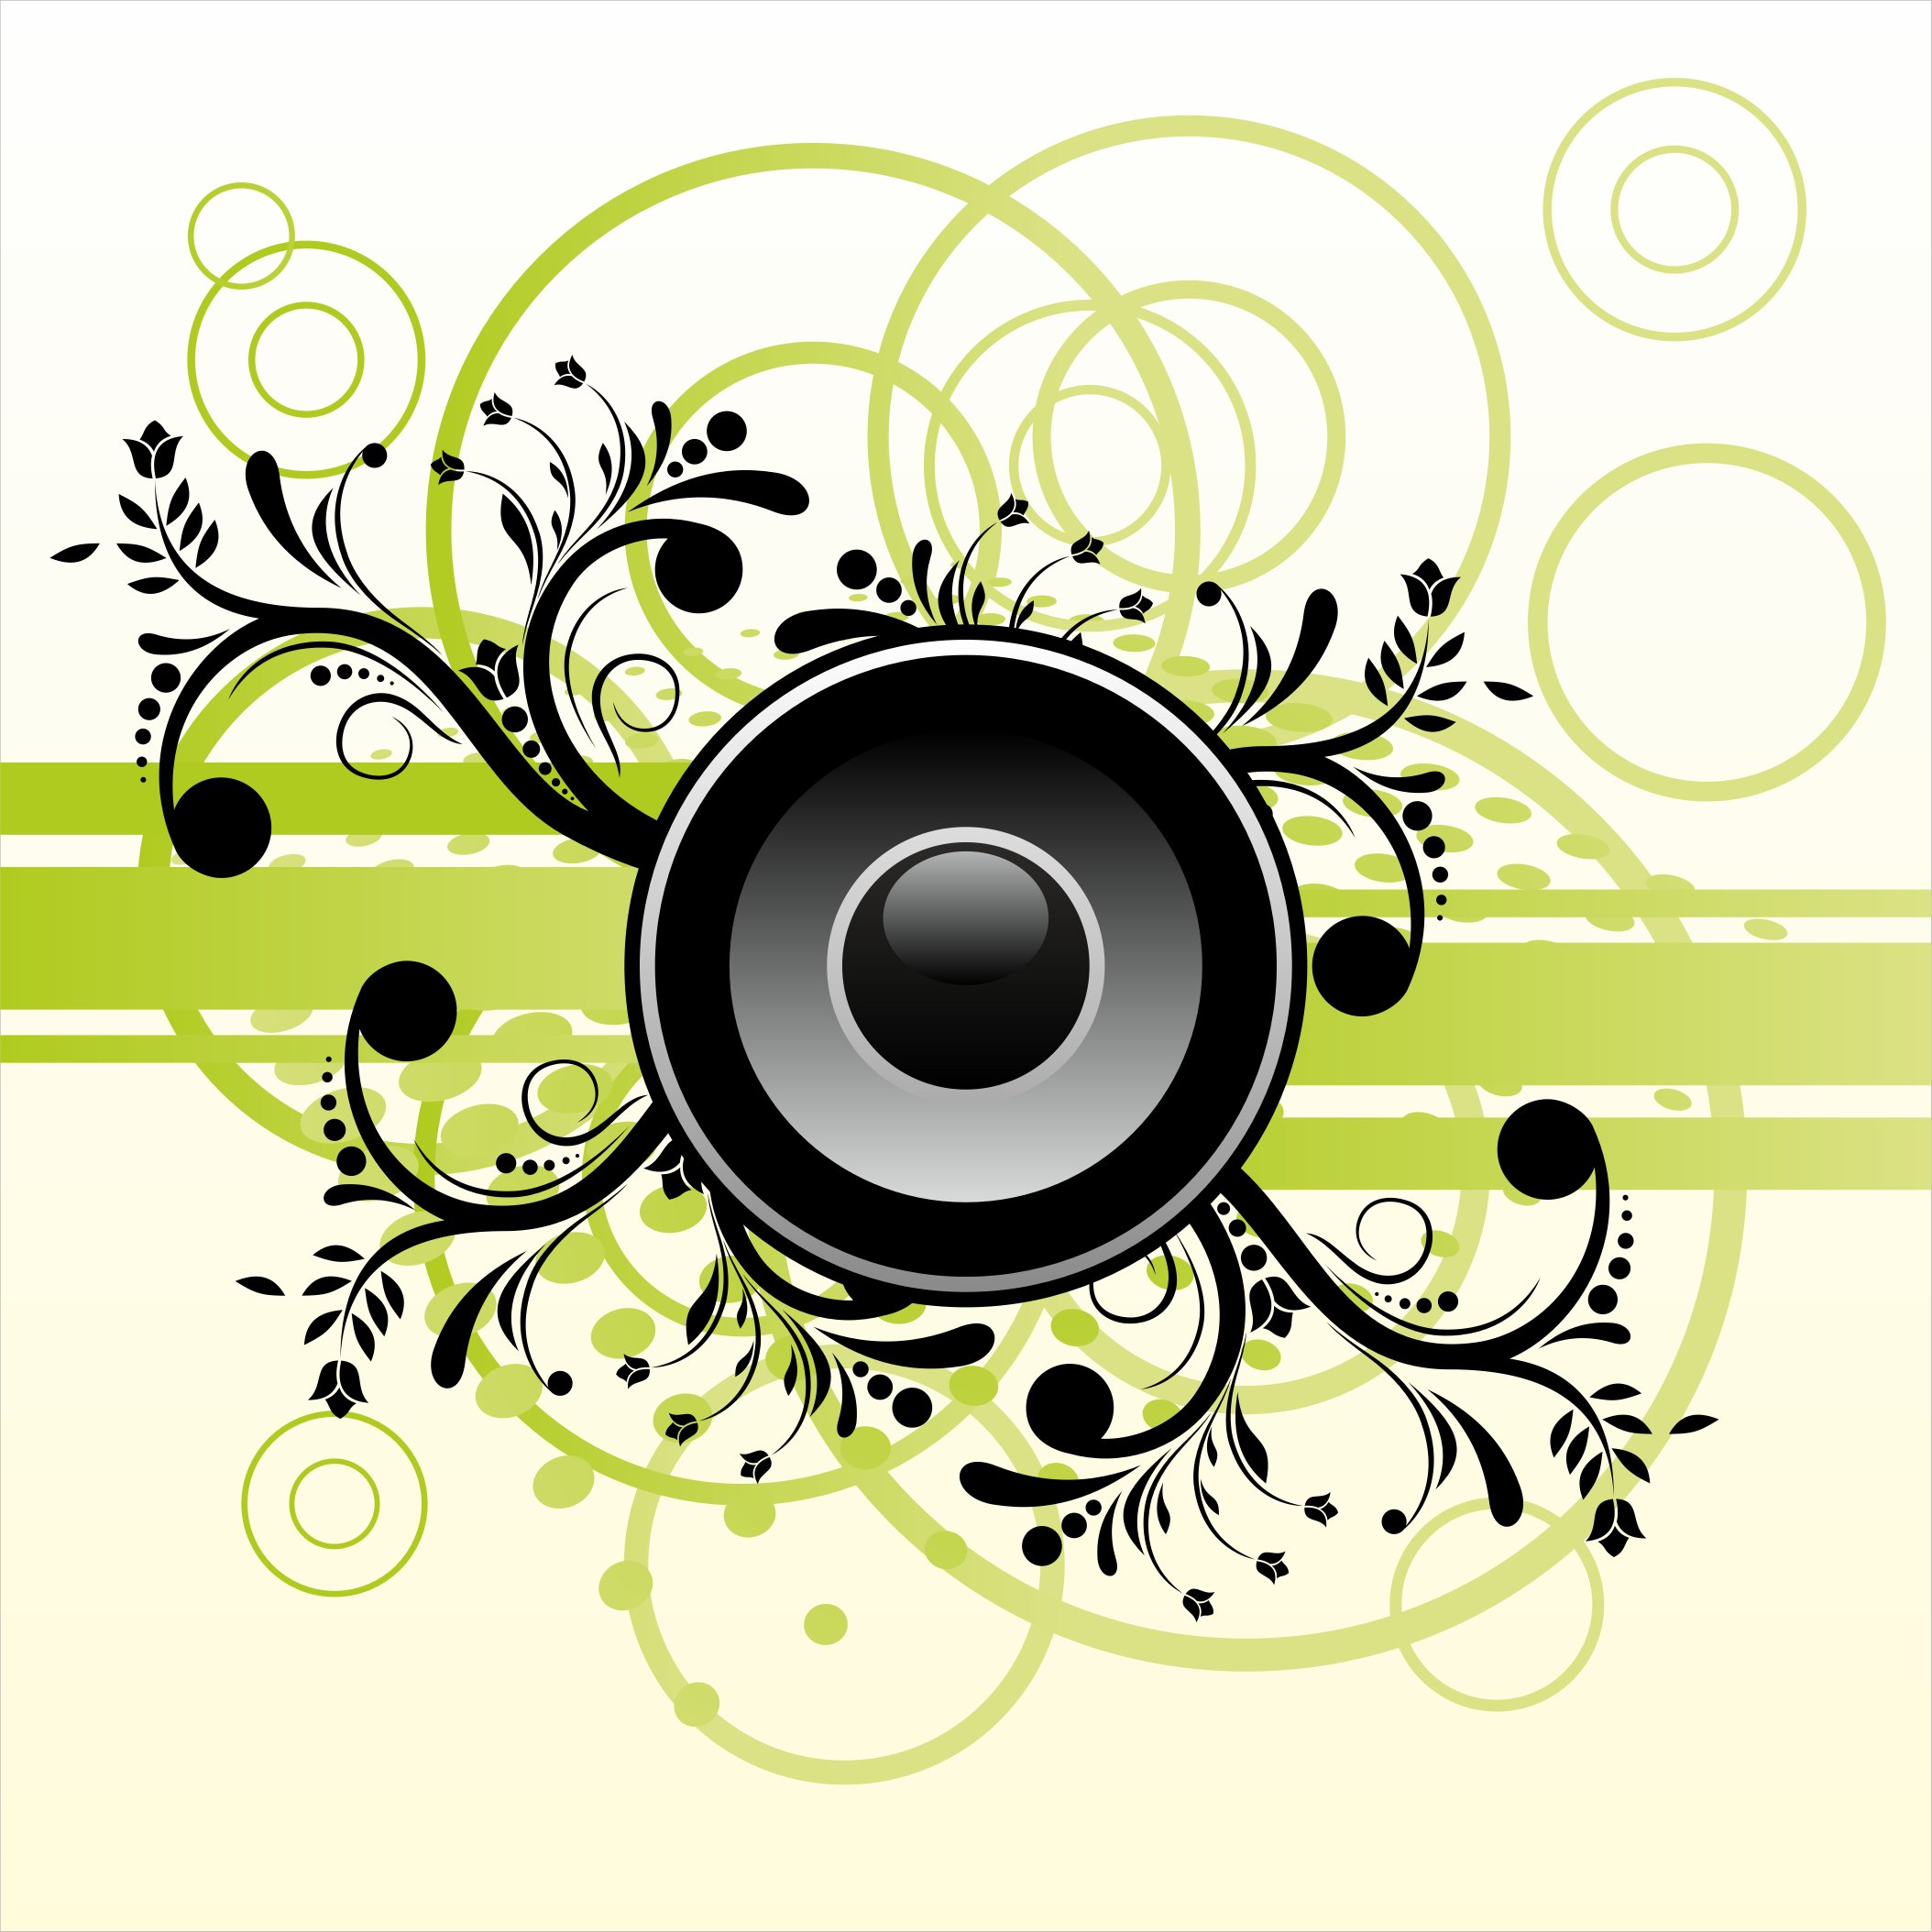 Speaker on abstract background SVG Clip arts